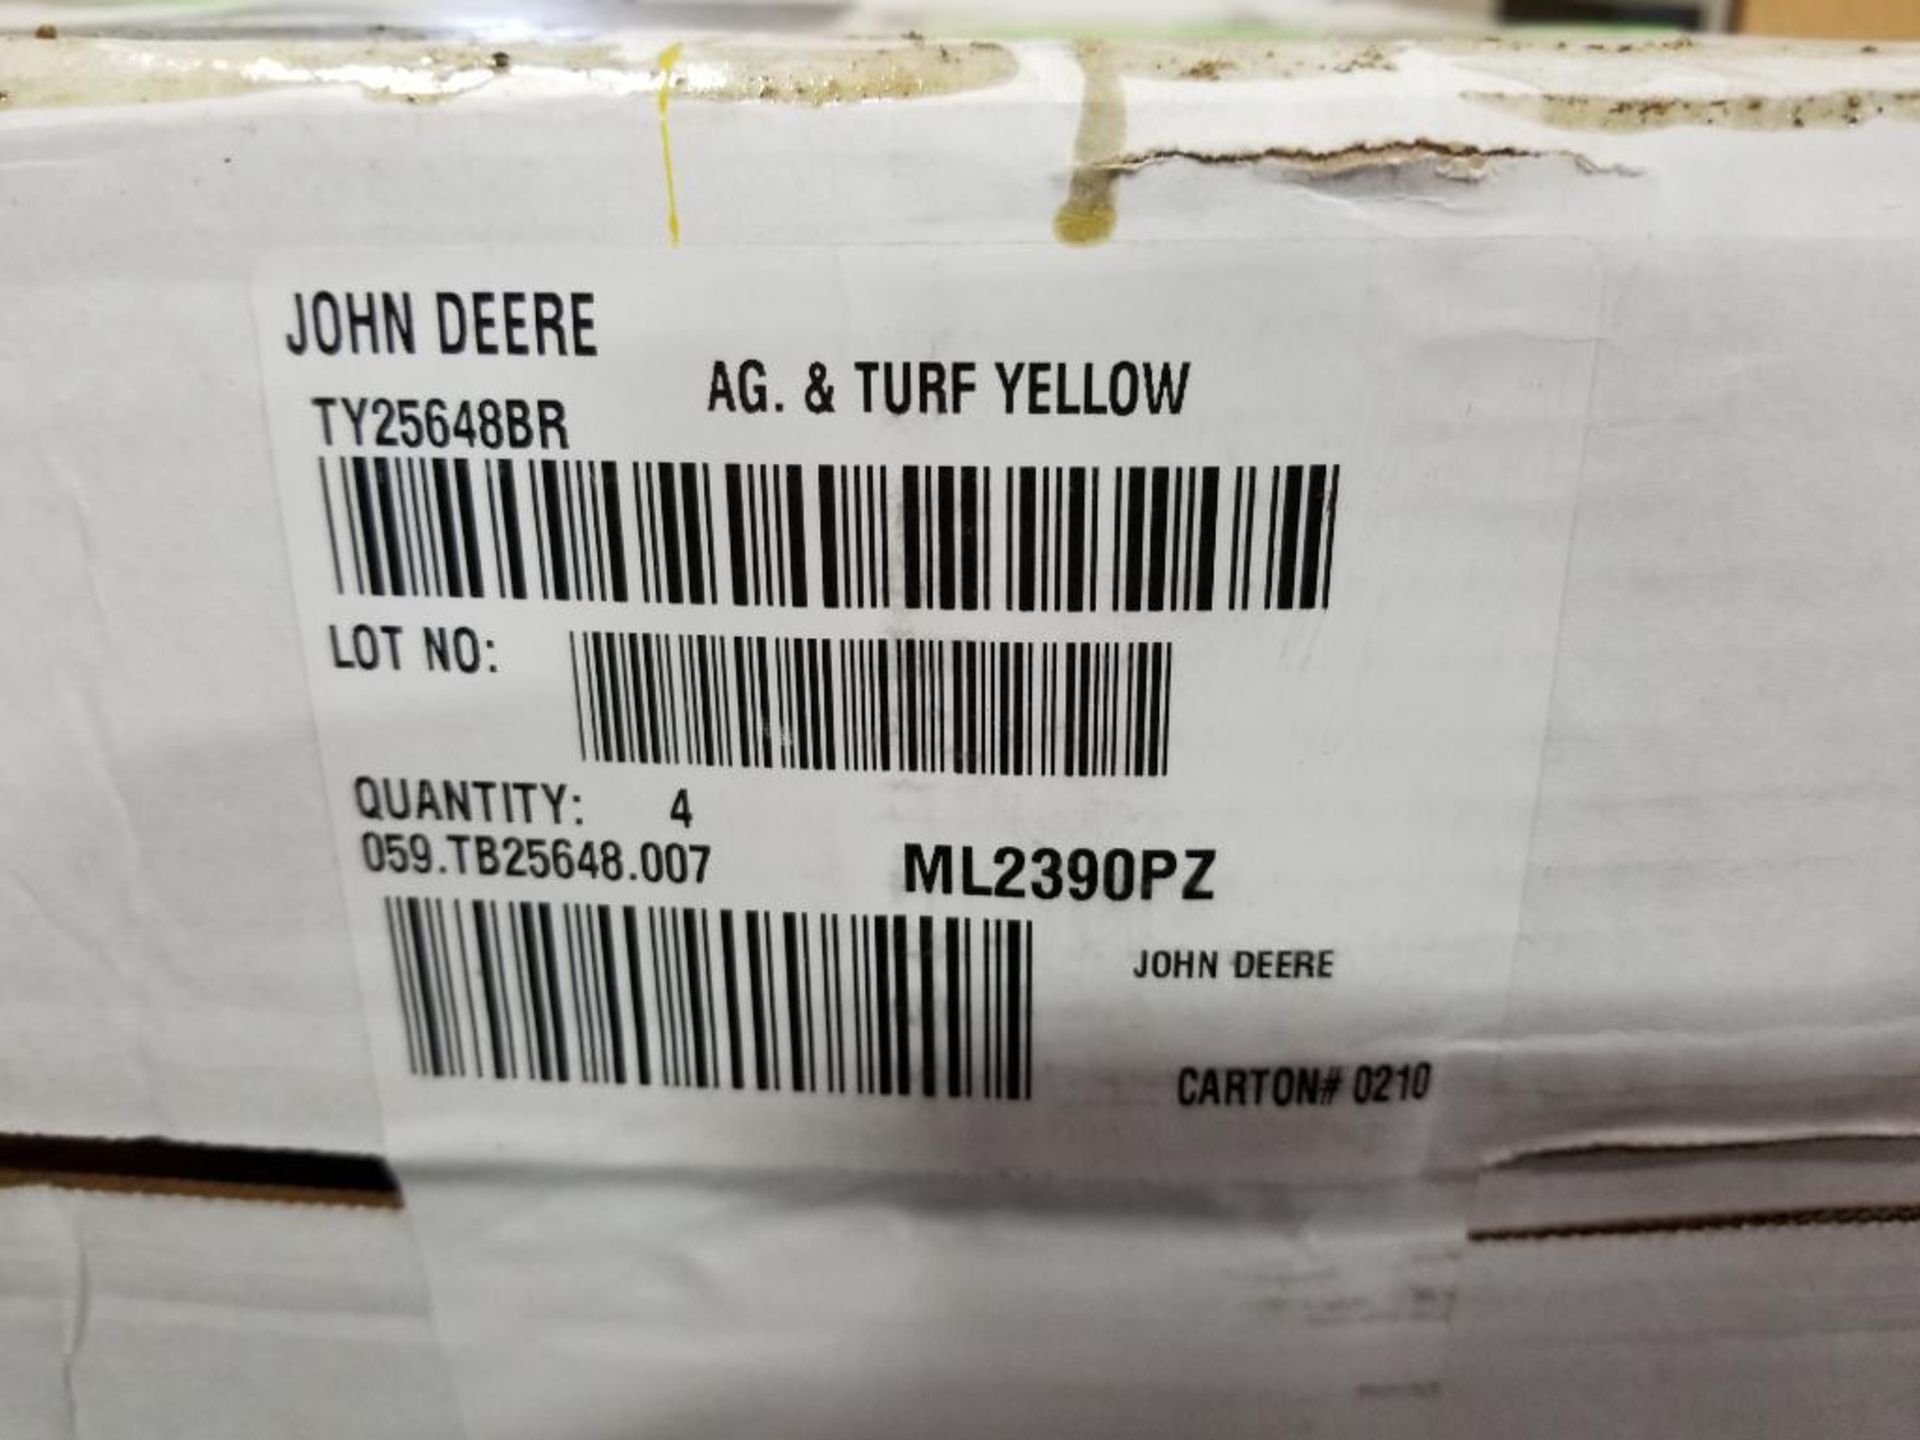 Qty 12 - John Deere TY25648BR Ag & Turf Yellow 1-Gallon paint. New in box. - Image 2 of 2